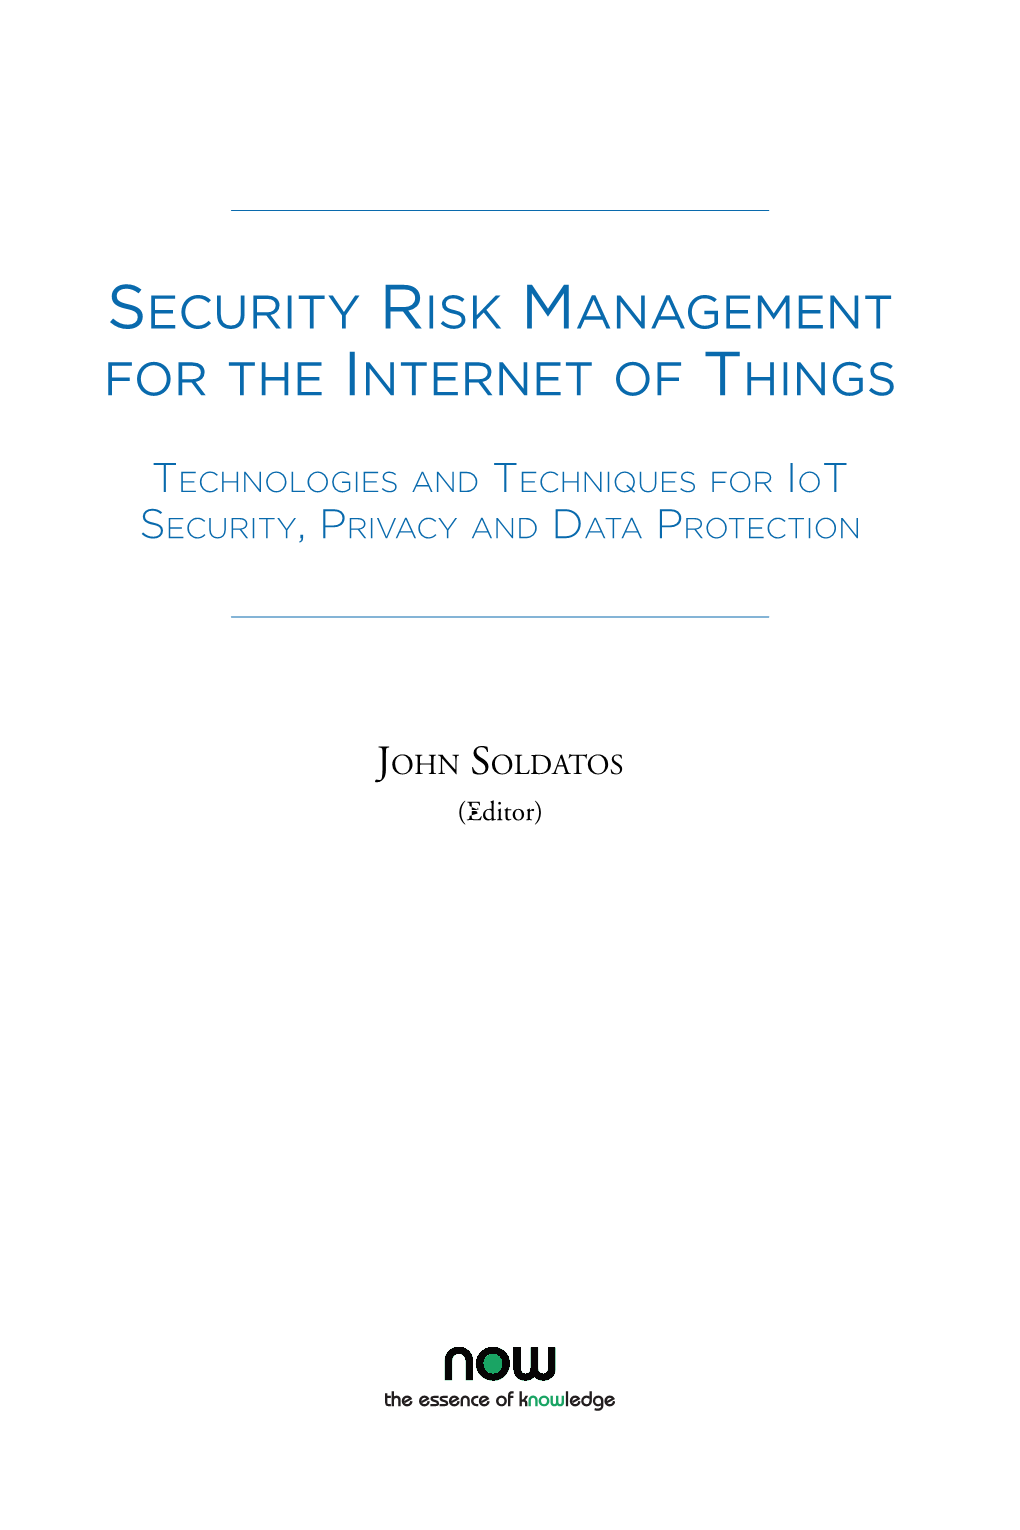 Security Risk Management for the Internet of Things